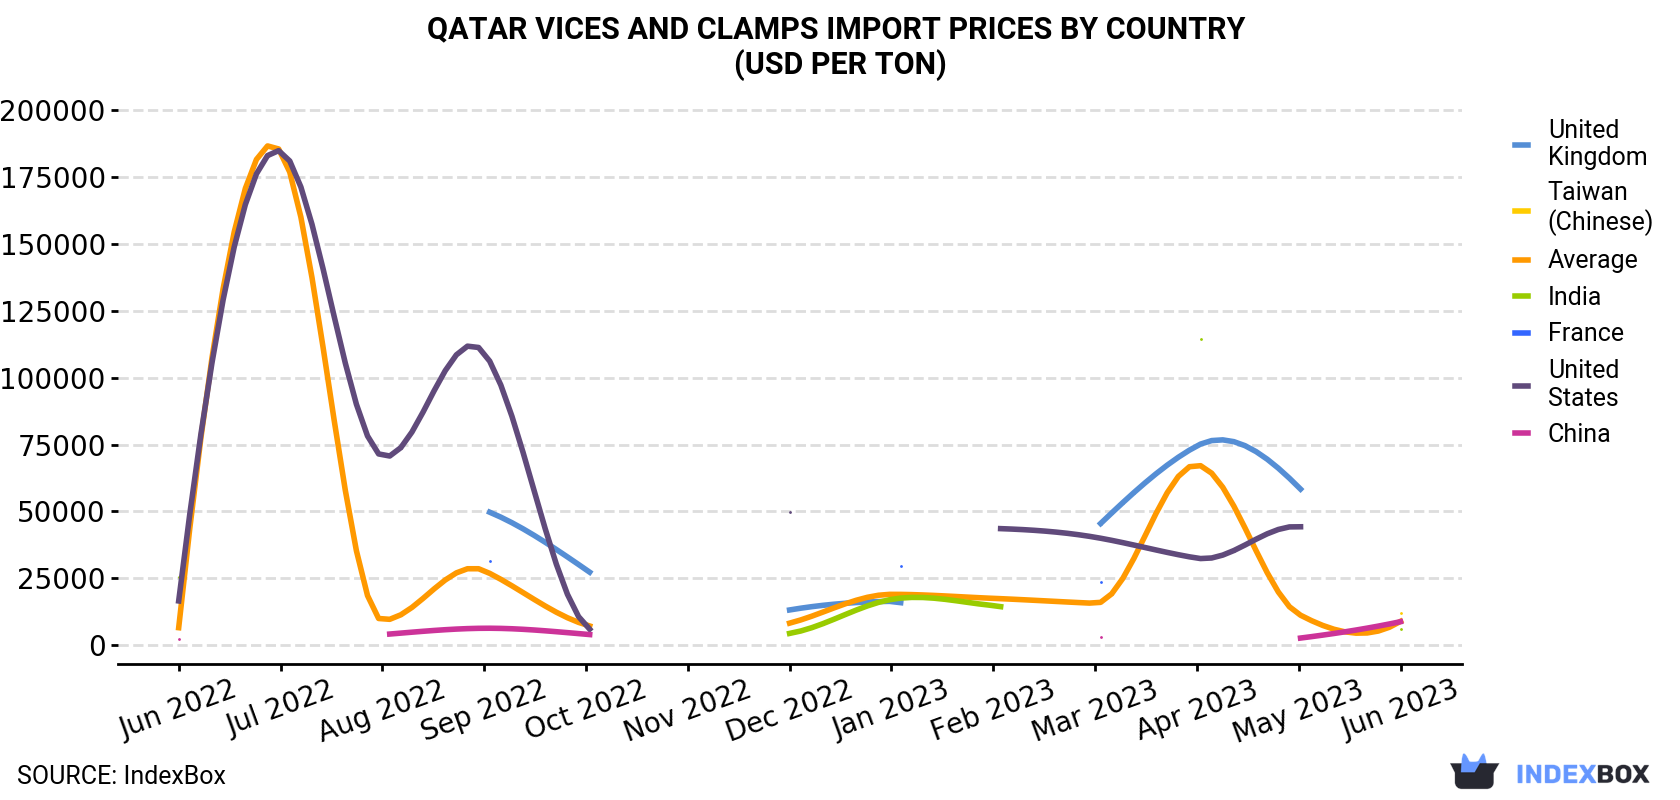 Qatar Vices And Clamps Import Prices By Country (USD Per Ton)